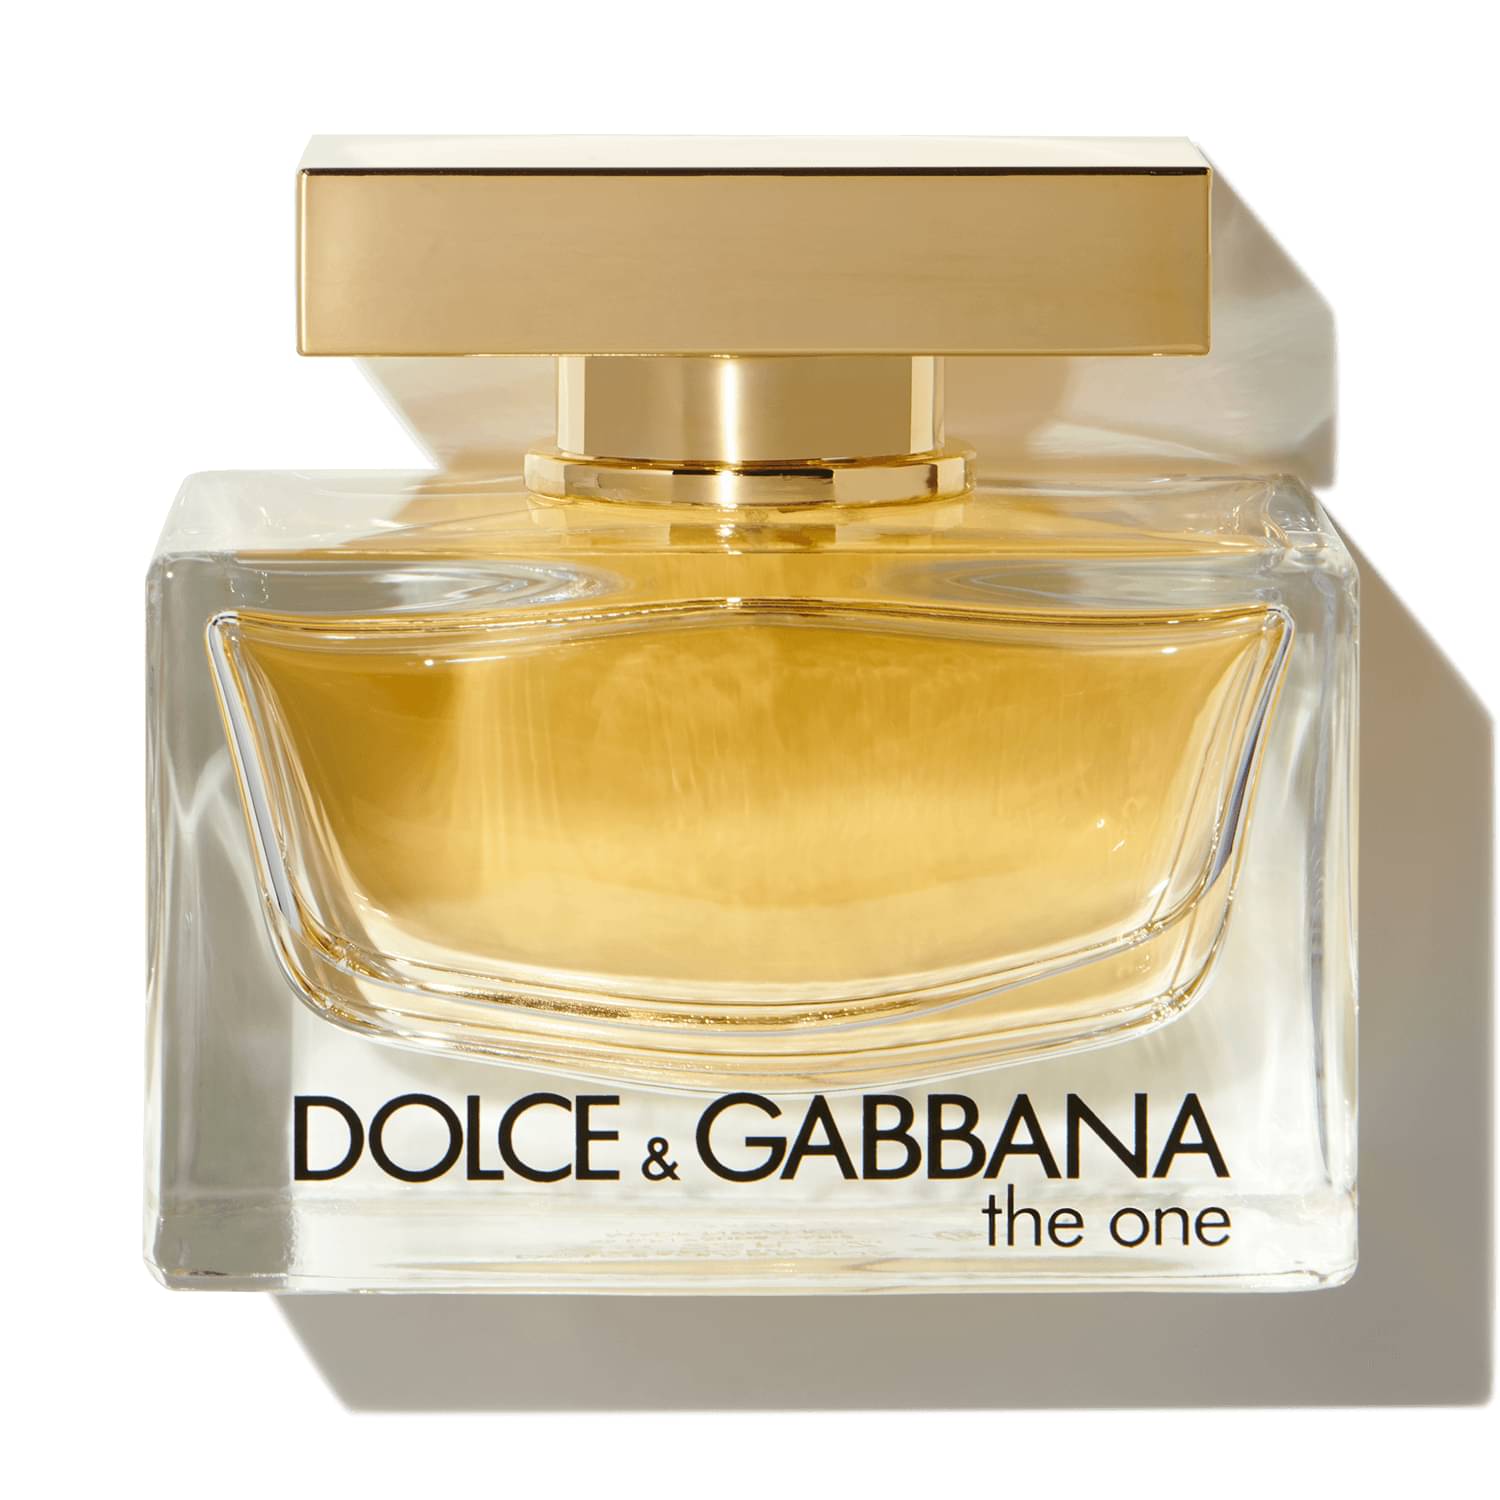 Buy DOLCE & GABBANA The One at Scentbird for $16.95